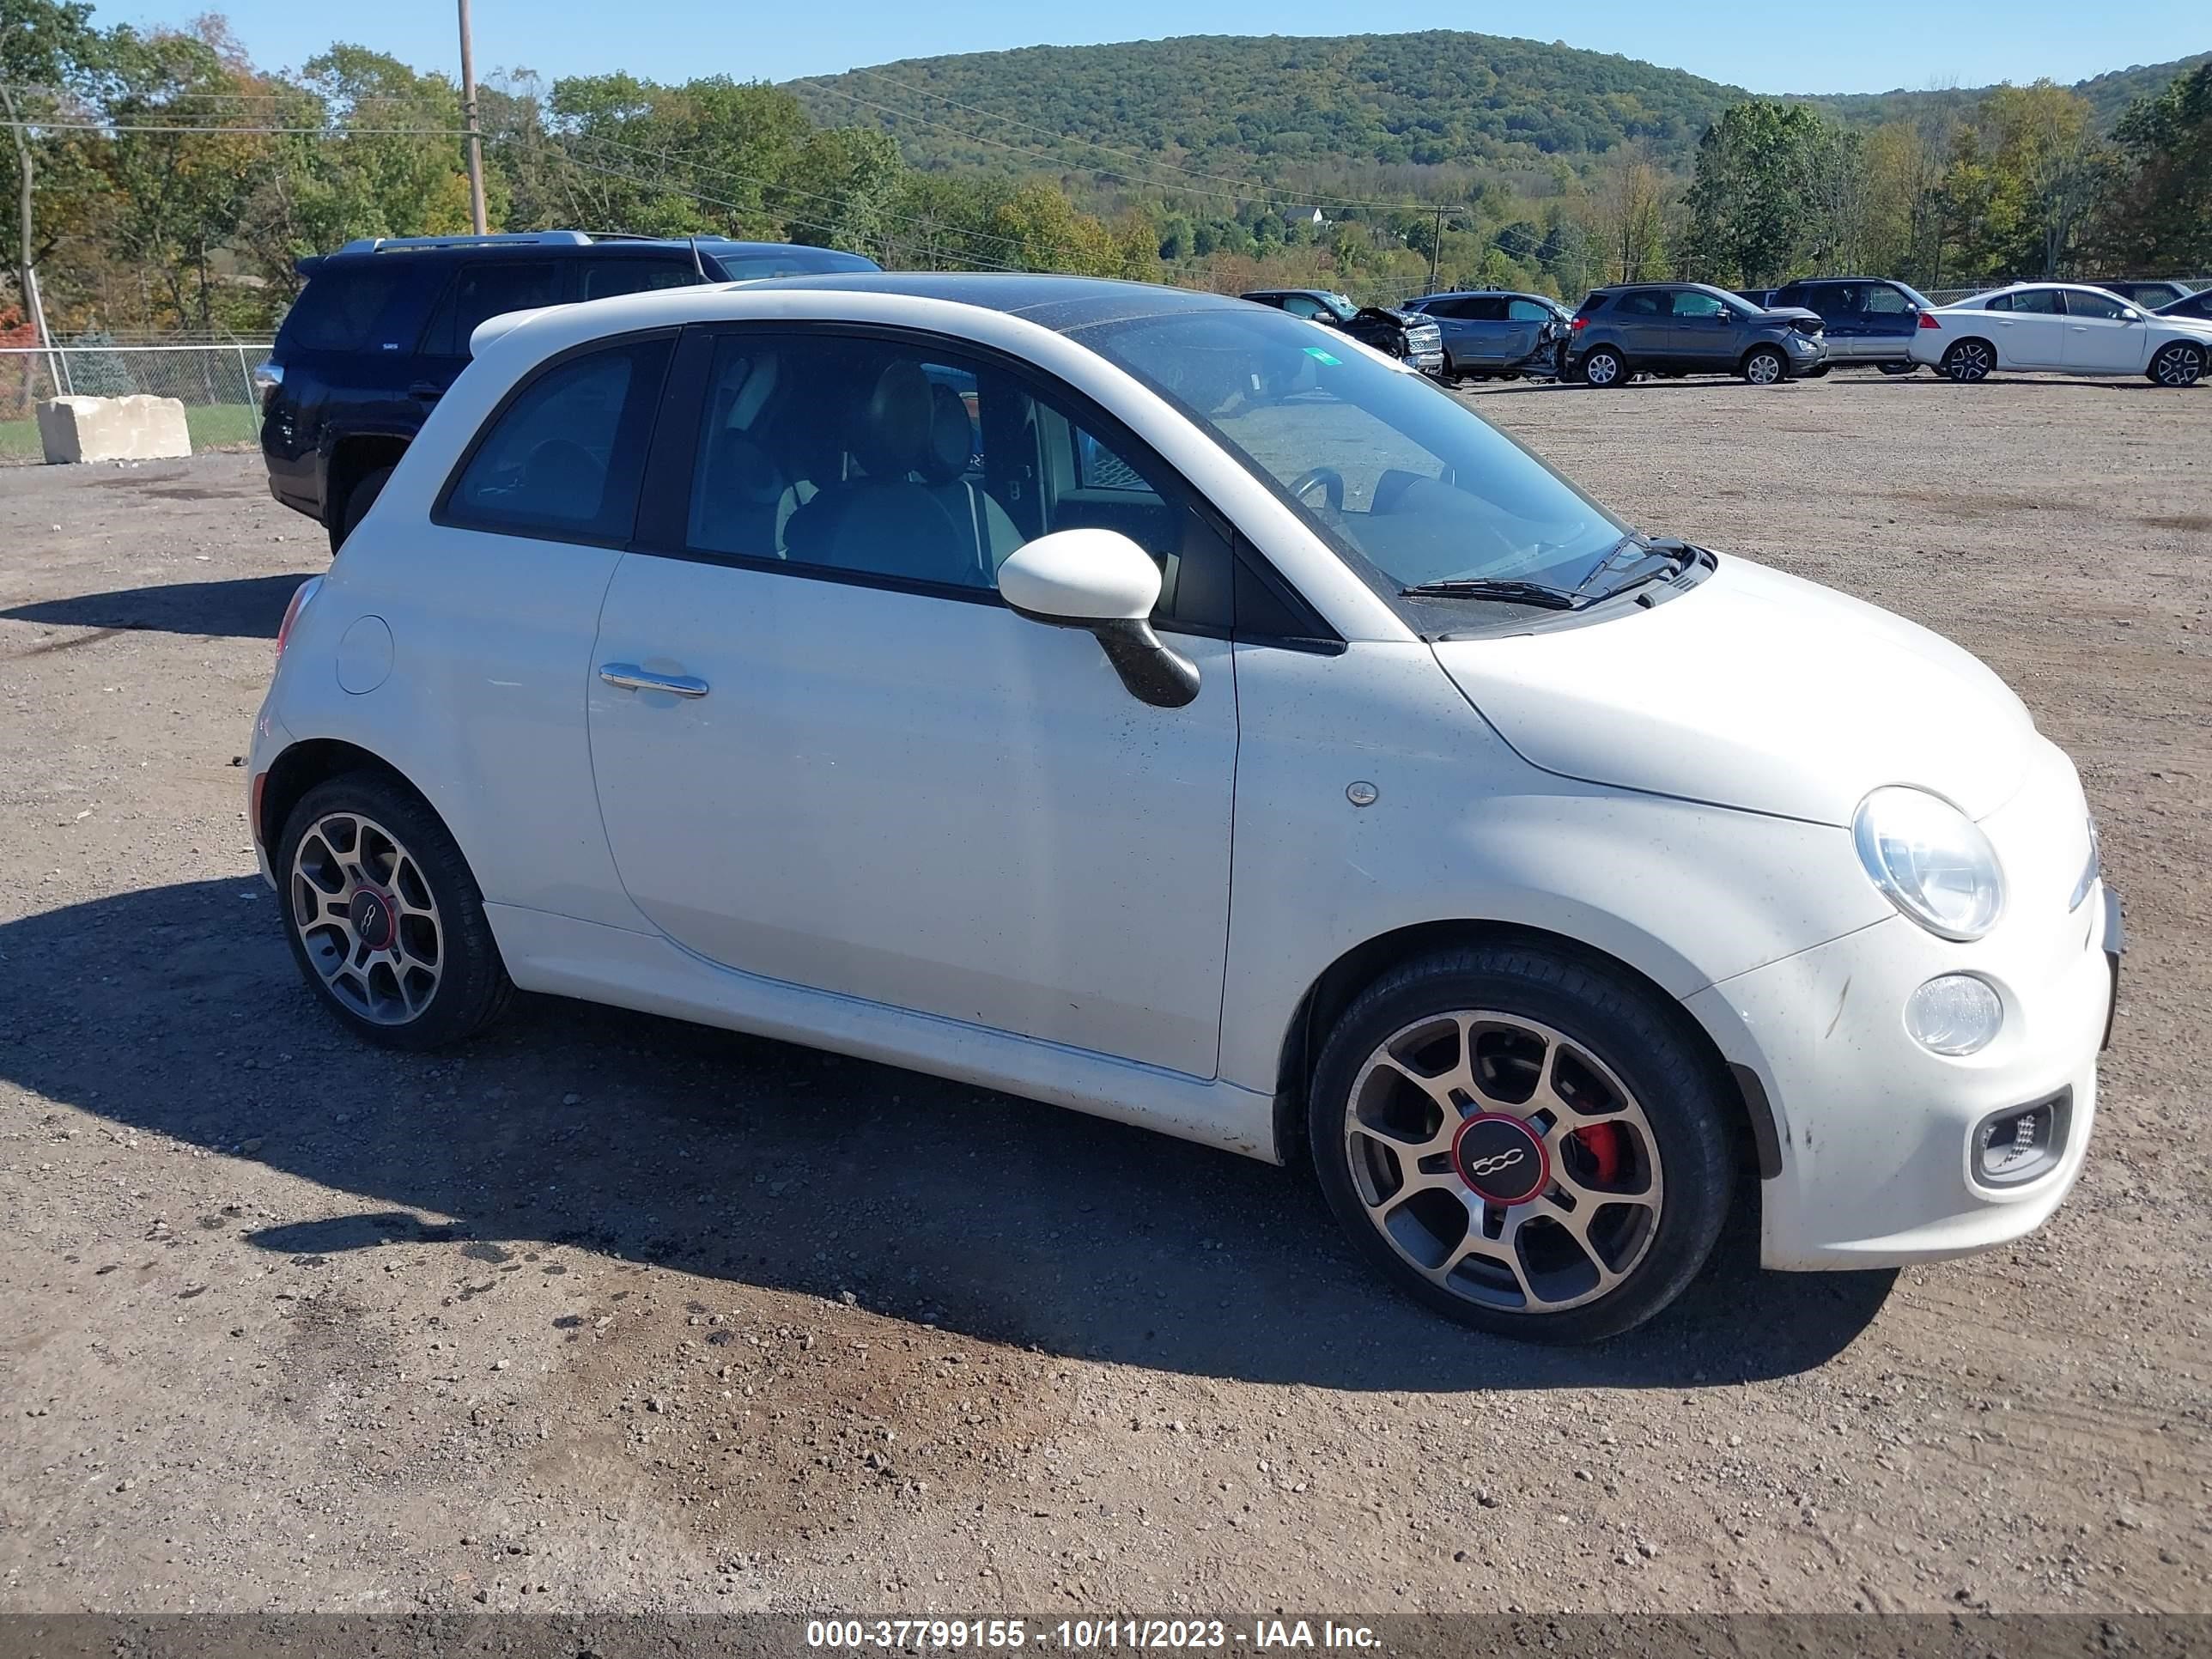 vin: 3C3CFFBR4CT310626 3C3CFFBR4CT310626 2012 fiat 500 1400 for Sale in 07865, 985 State Route 57, Port Murray, USA